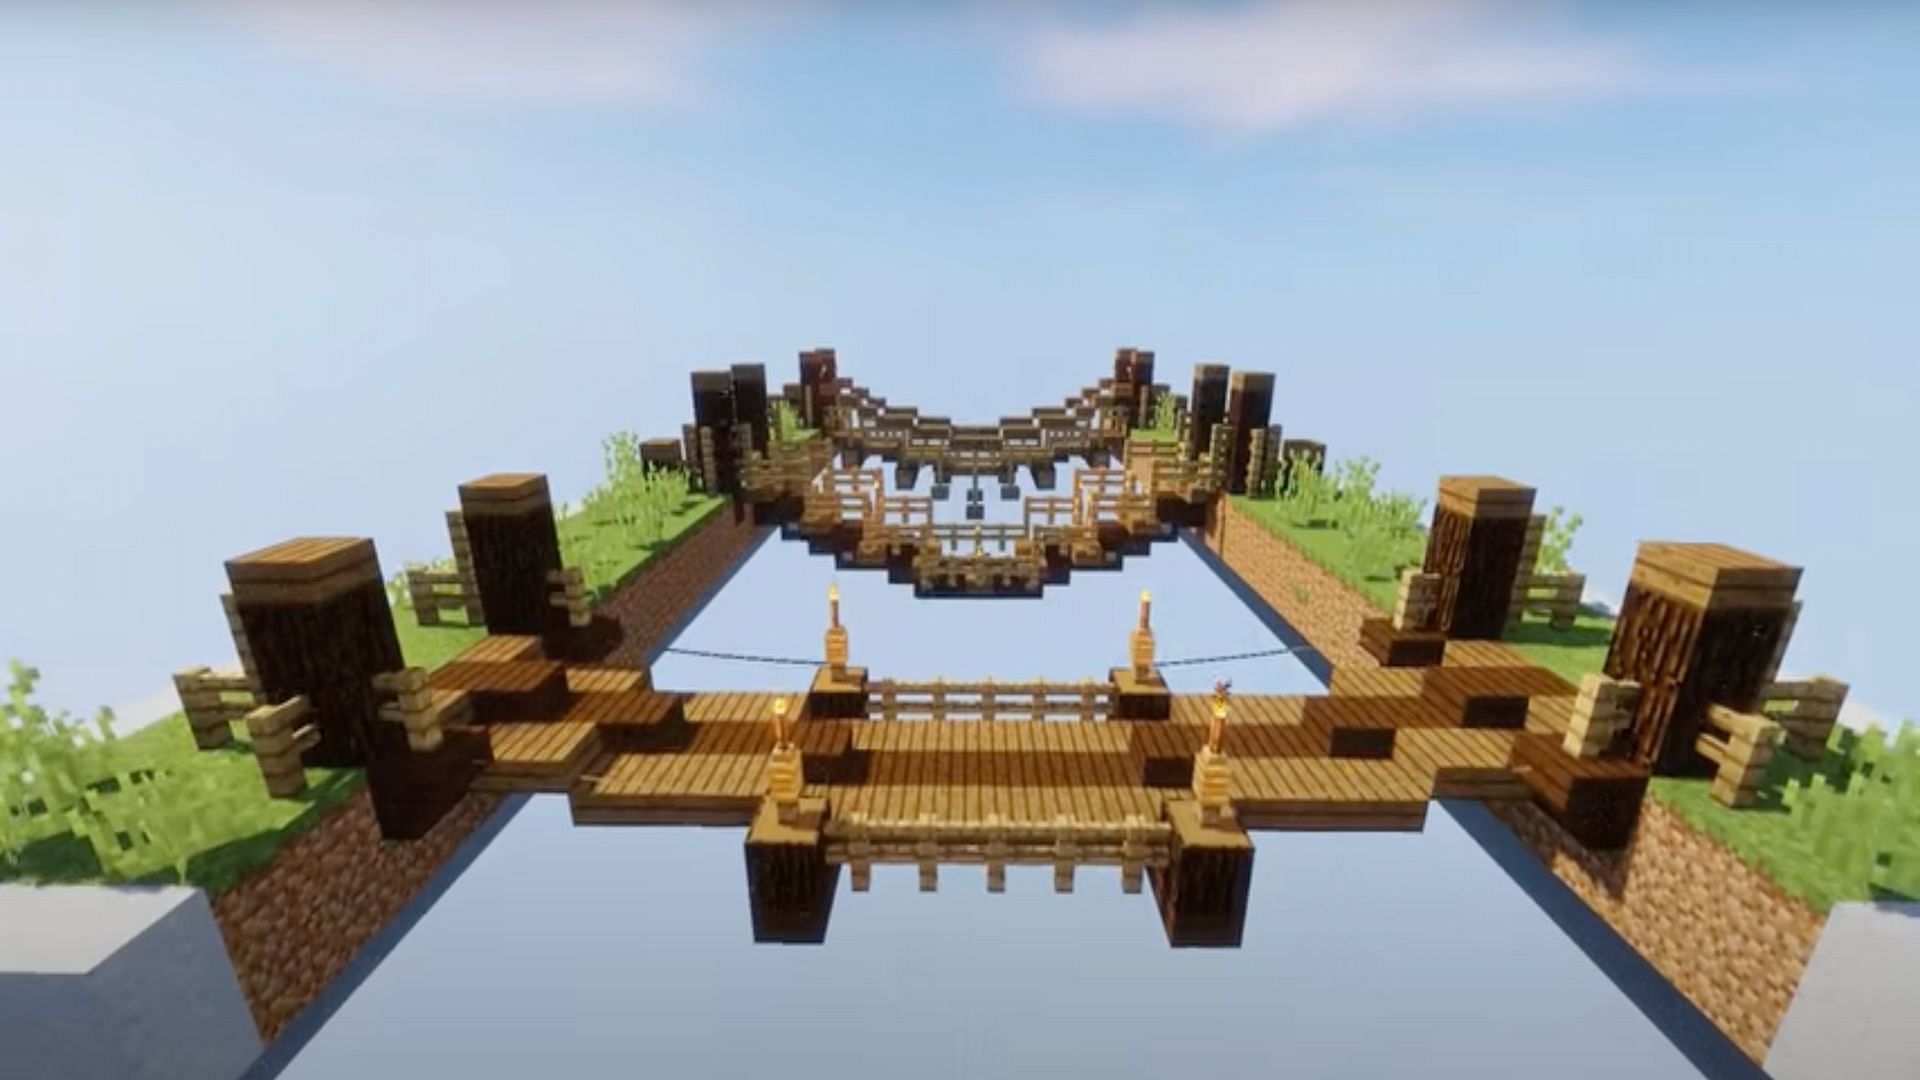 Rope bridges are a simple concept, but can be executed in many different ways for unique looks (Image via JayLythical/YouTube)